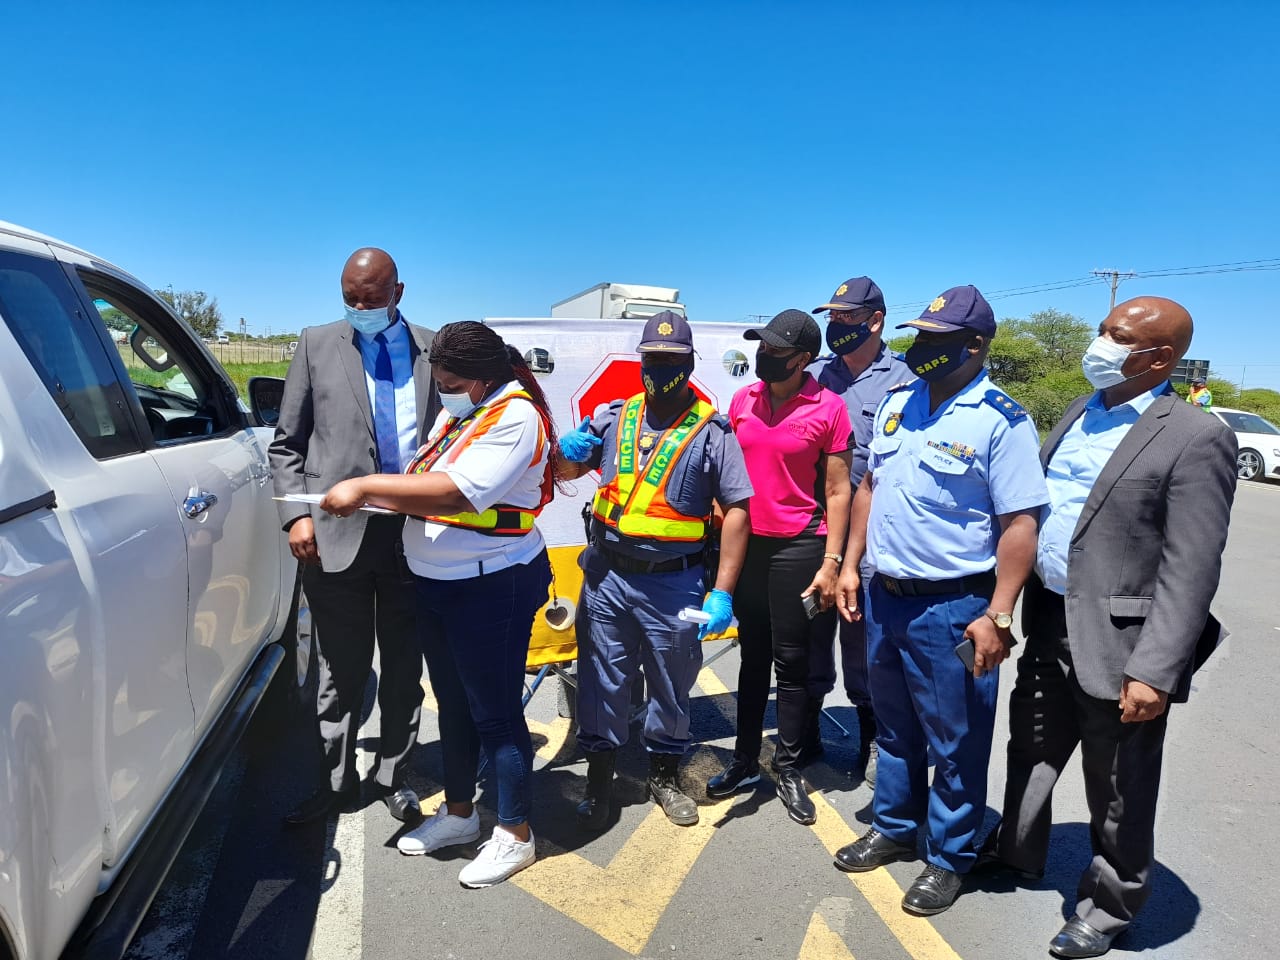 The safer festive season operations kicks off in Northern Cape with an official launch on the N12 road in Kimberley